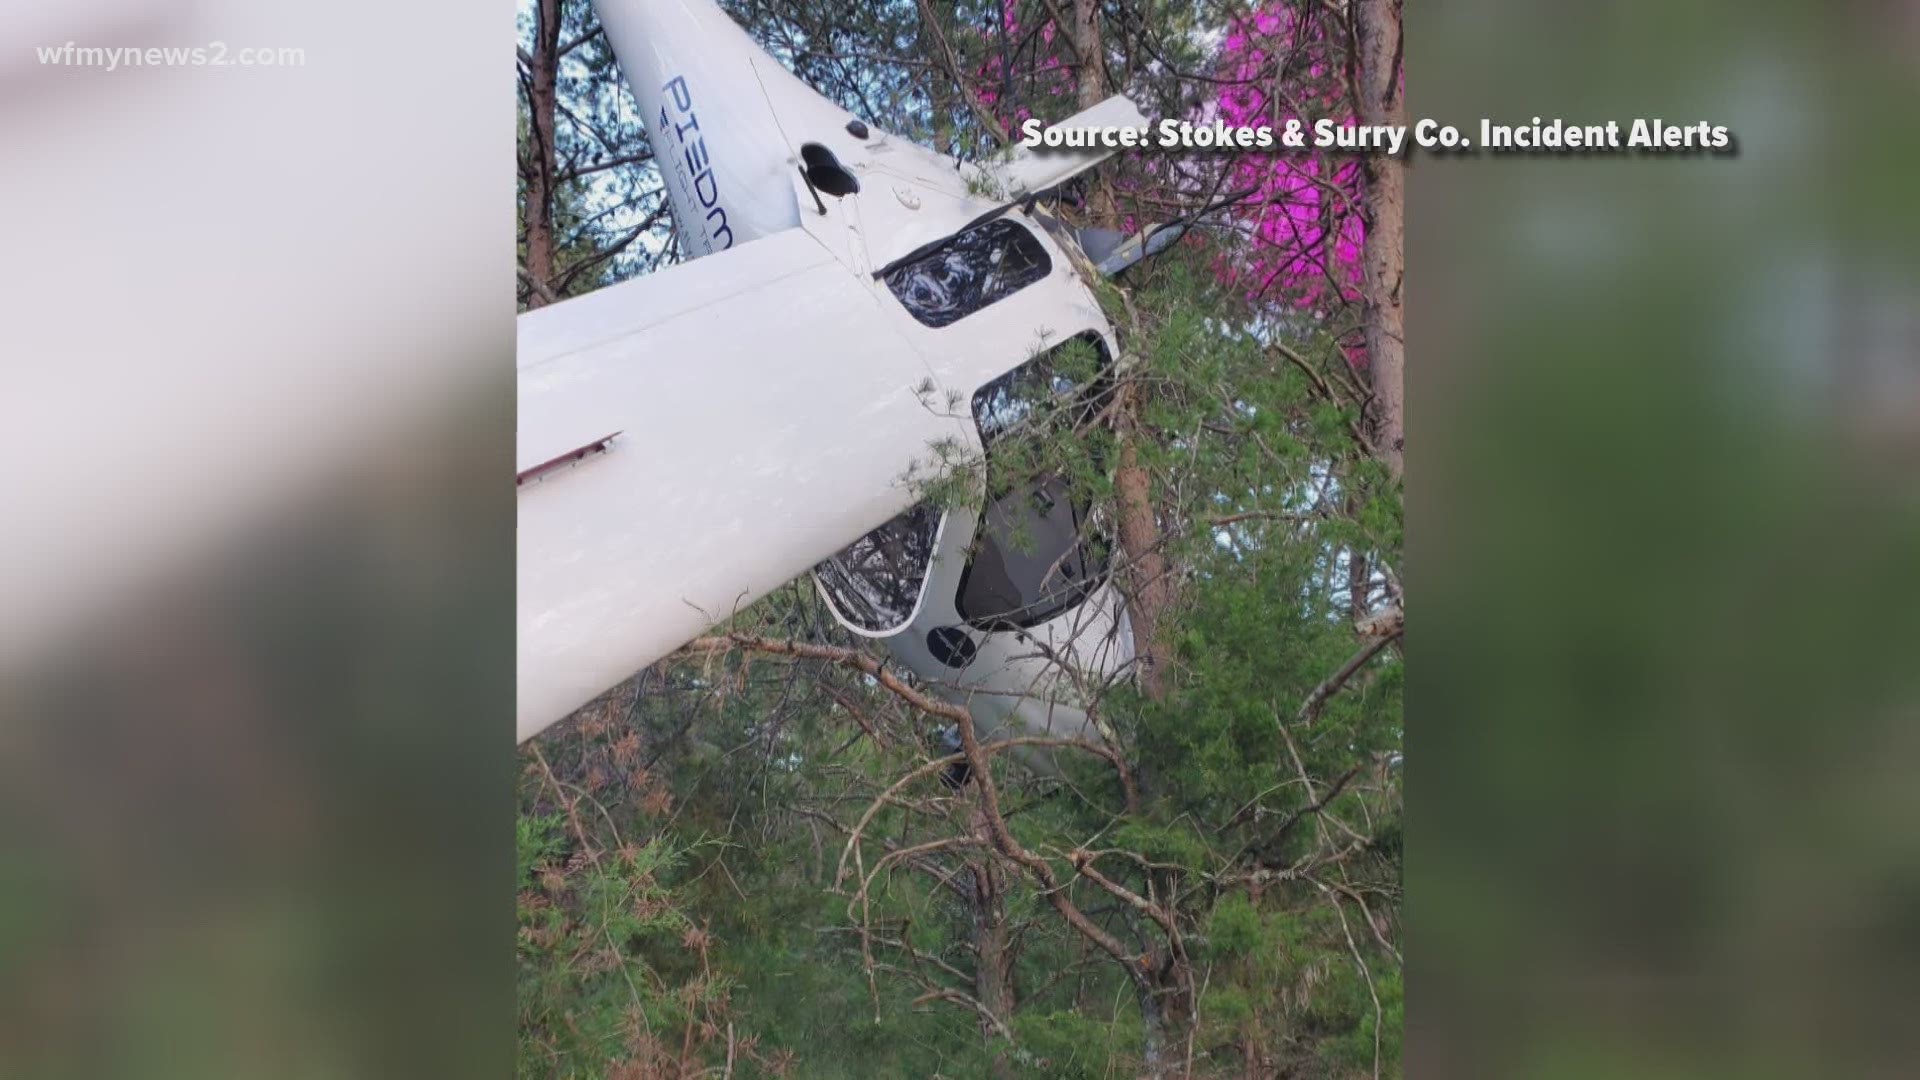 Trooper Mastromonica, with the North Carolina State High Patrol, said the crash happened around 4:30 p.m. in the area of Hwy 66 at Payne Road.